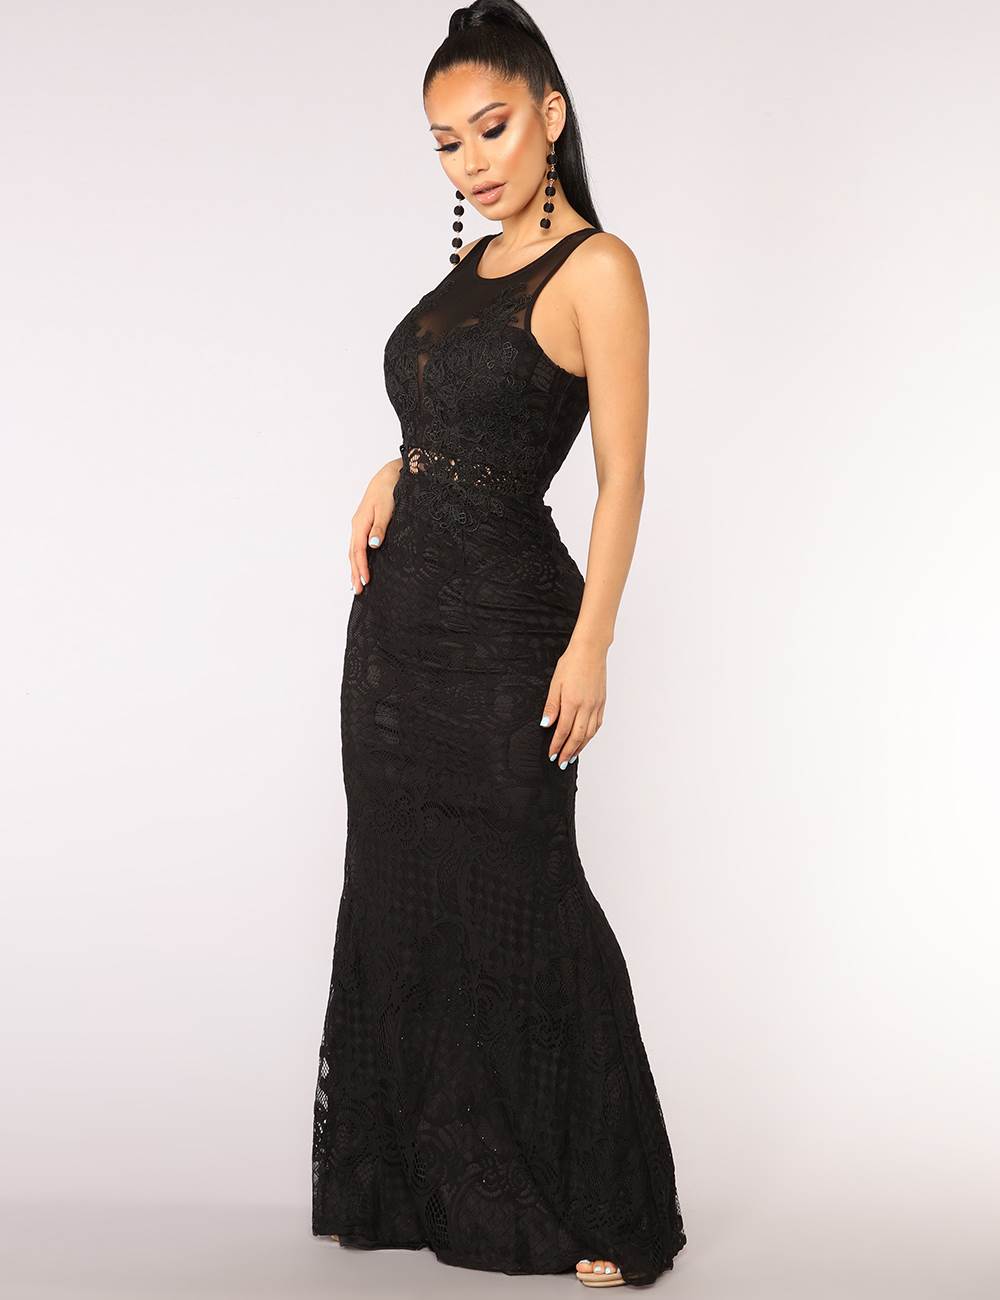 Buy The High Performance Price Ratio Evening Dress Online At comeondear.com